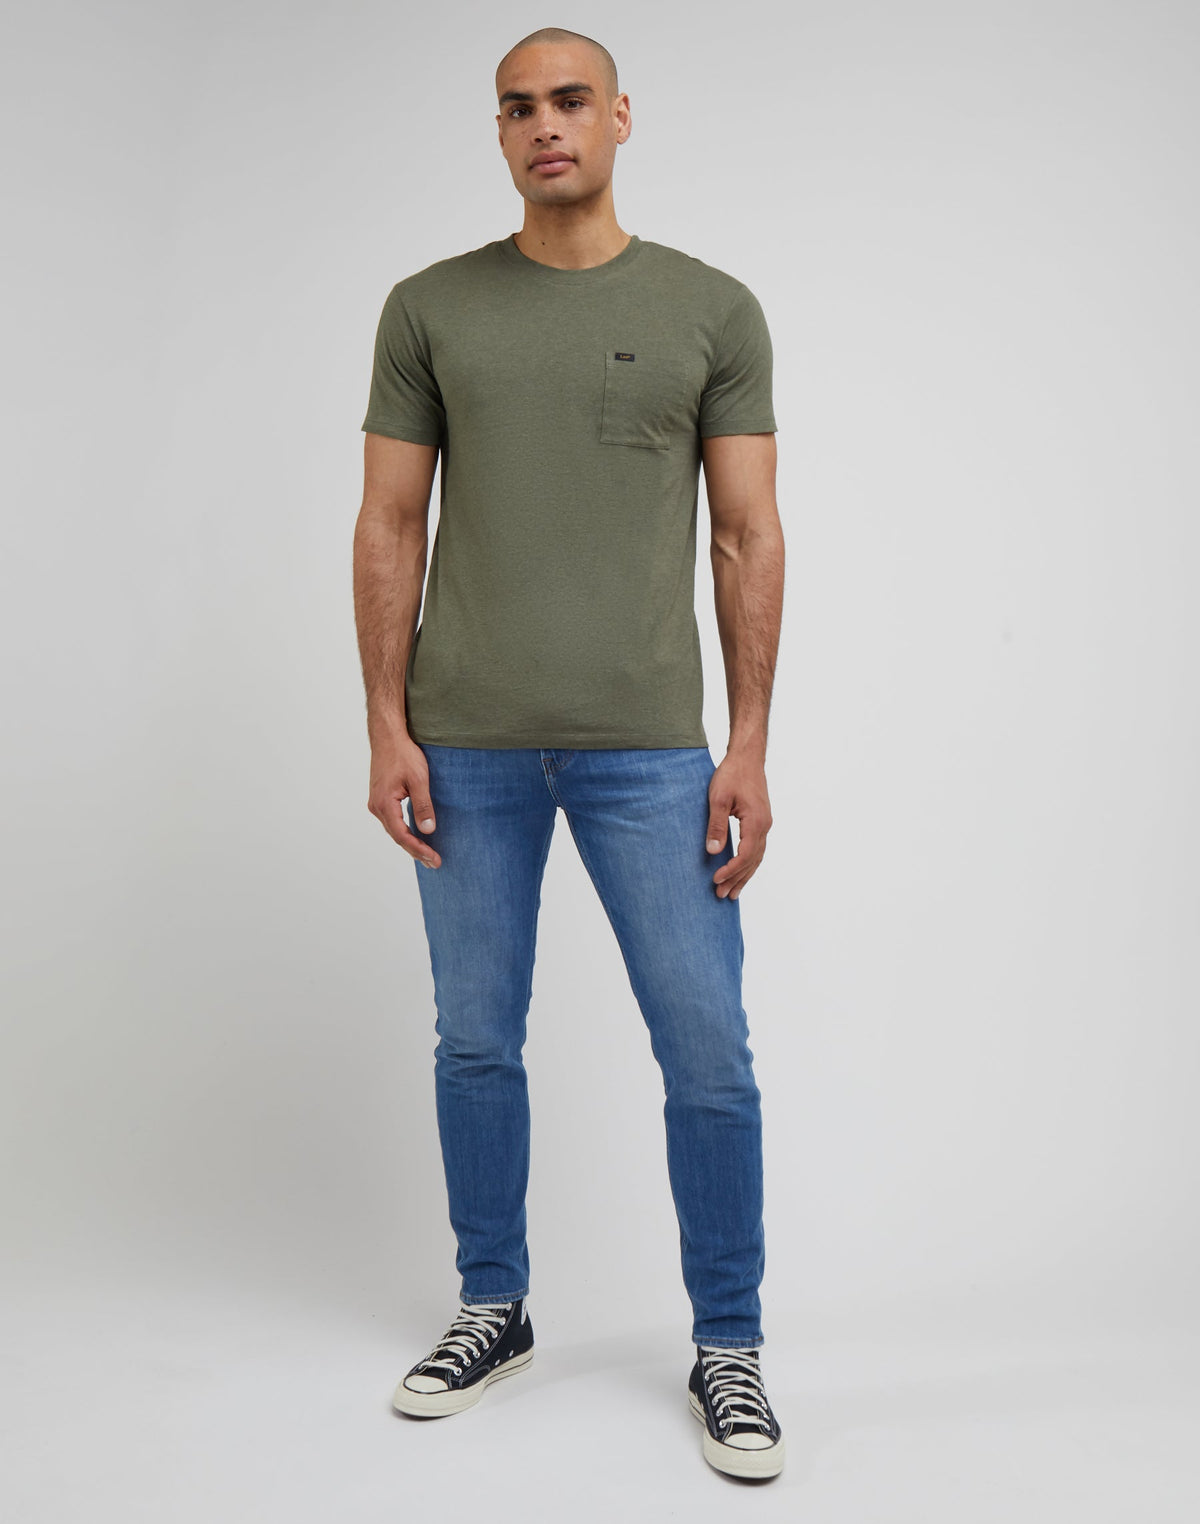 Ultimate Pocket Tee in Olive Grove